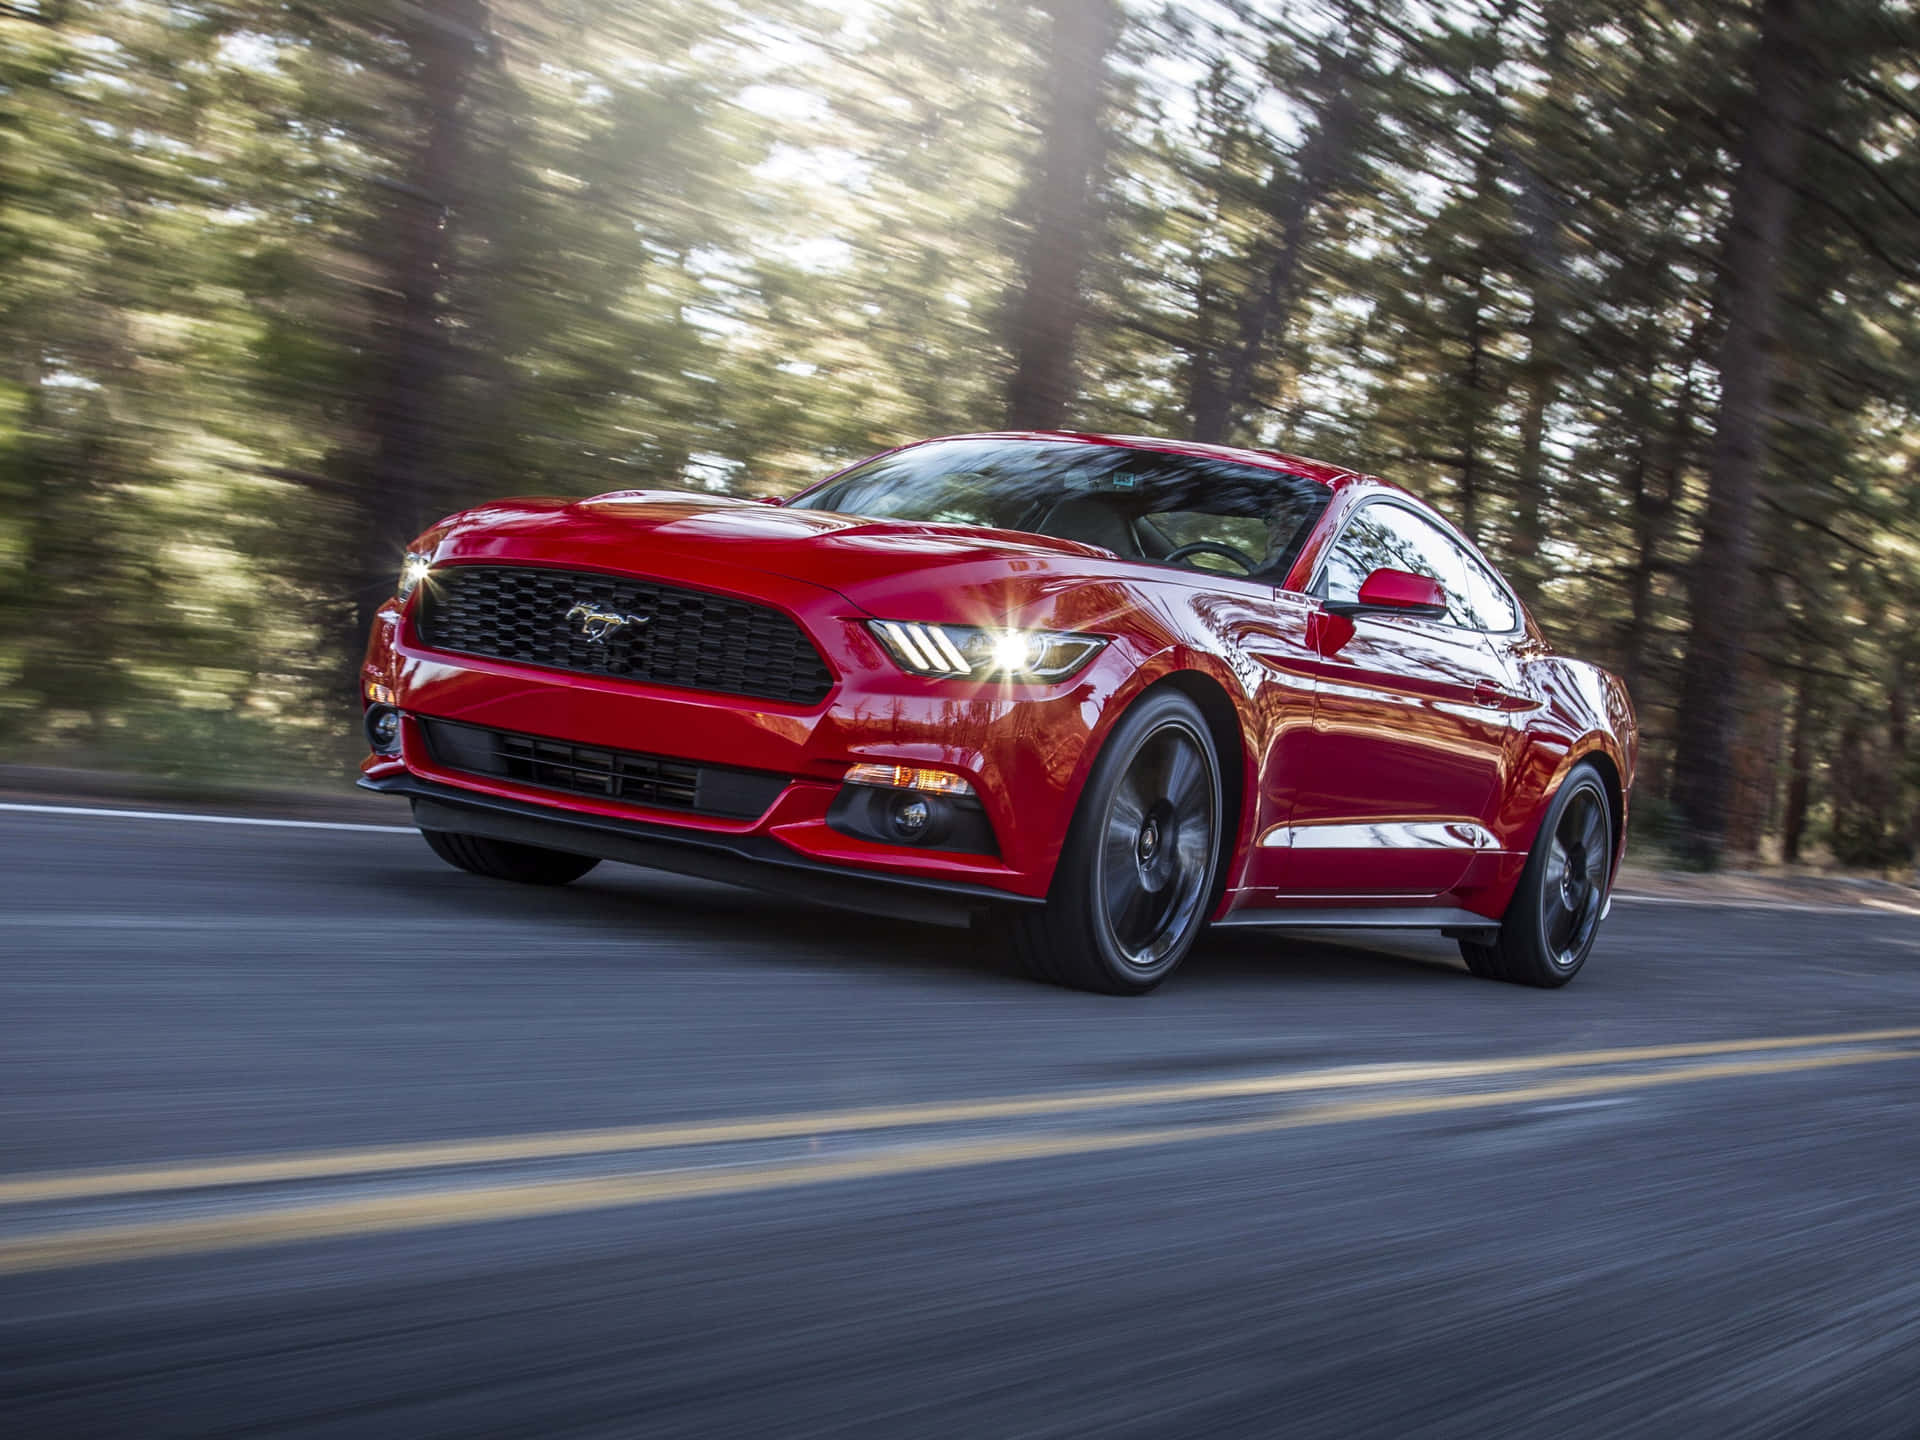 Sleek Ford Mustang Ecoboost on the Open Road Wallpaper